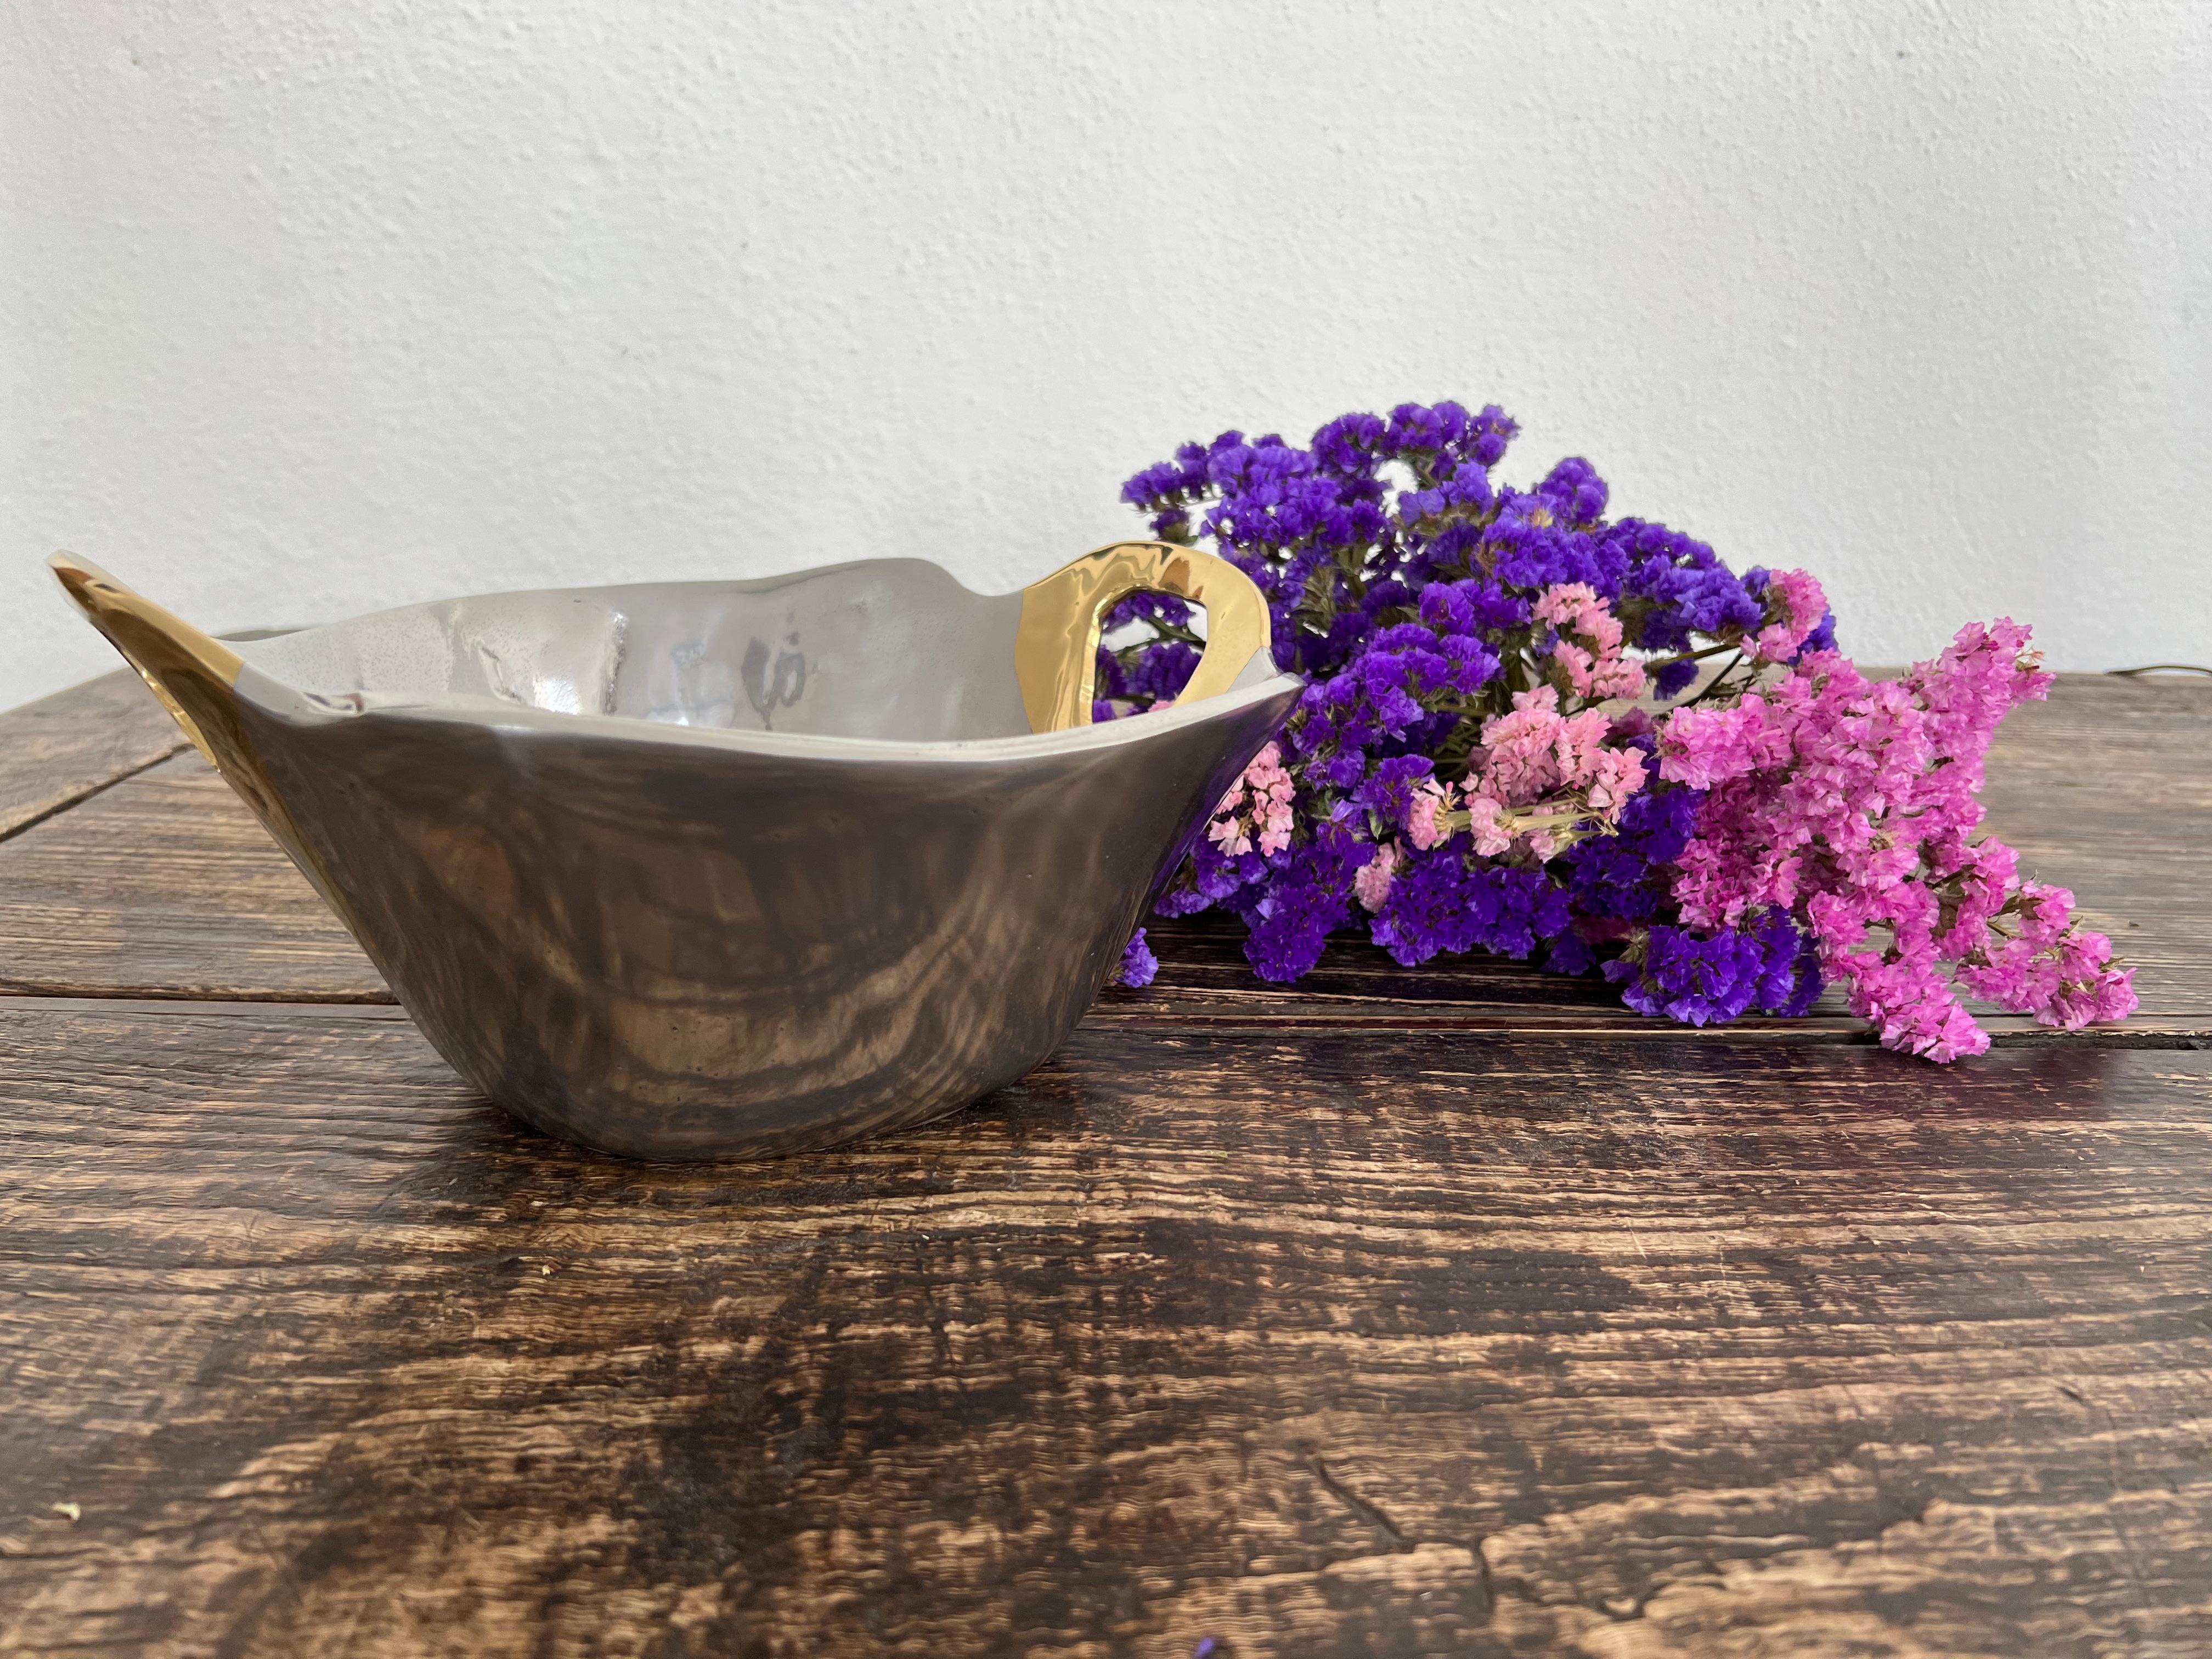 The decorative Basket Bowl was created by David Marshall, it is made of sand cast aluminum and sand cast brass.
Handmade, mounted and finished in our foundry and workshop in Spain from recycled materials.
Certified authentic by the Artist David